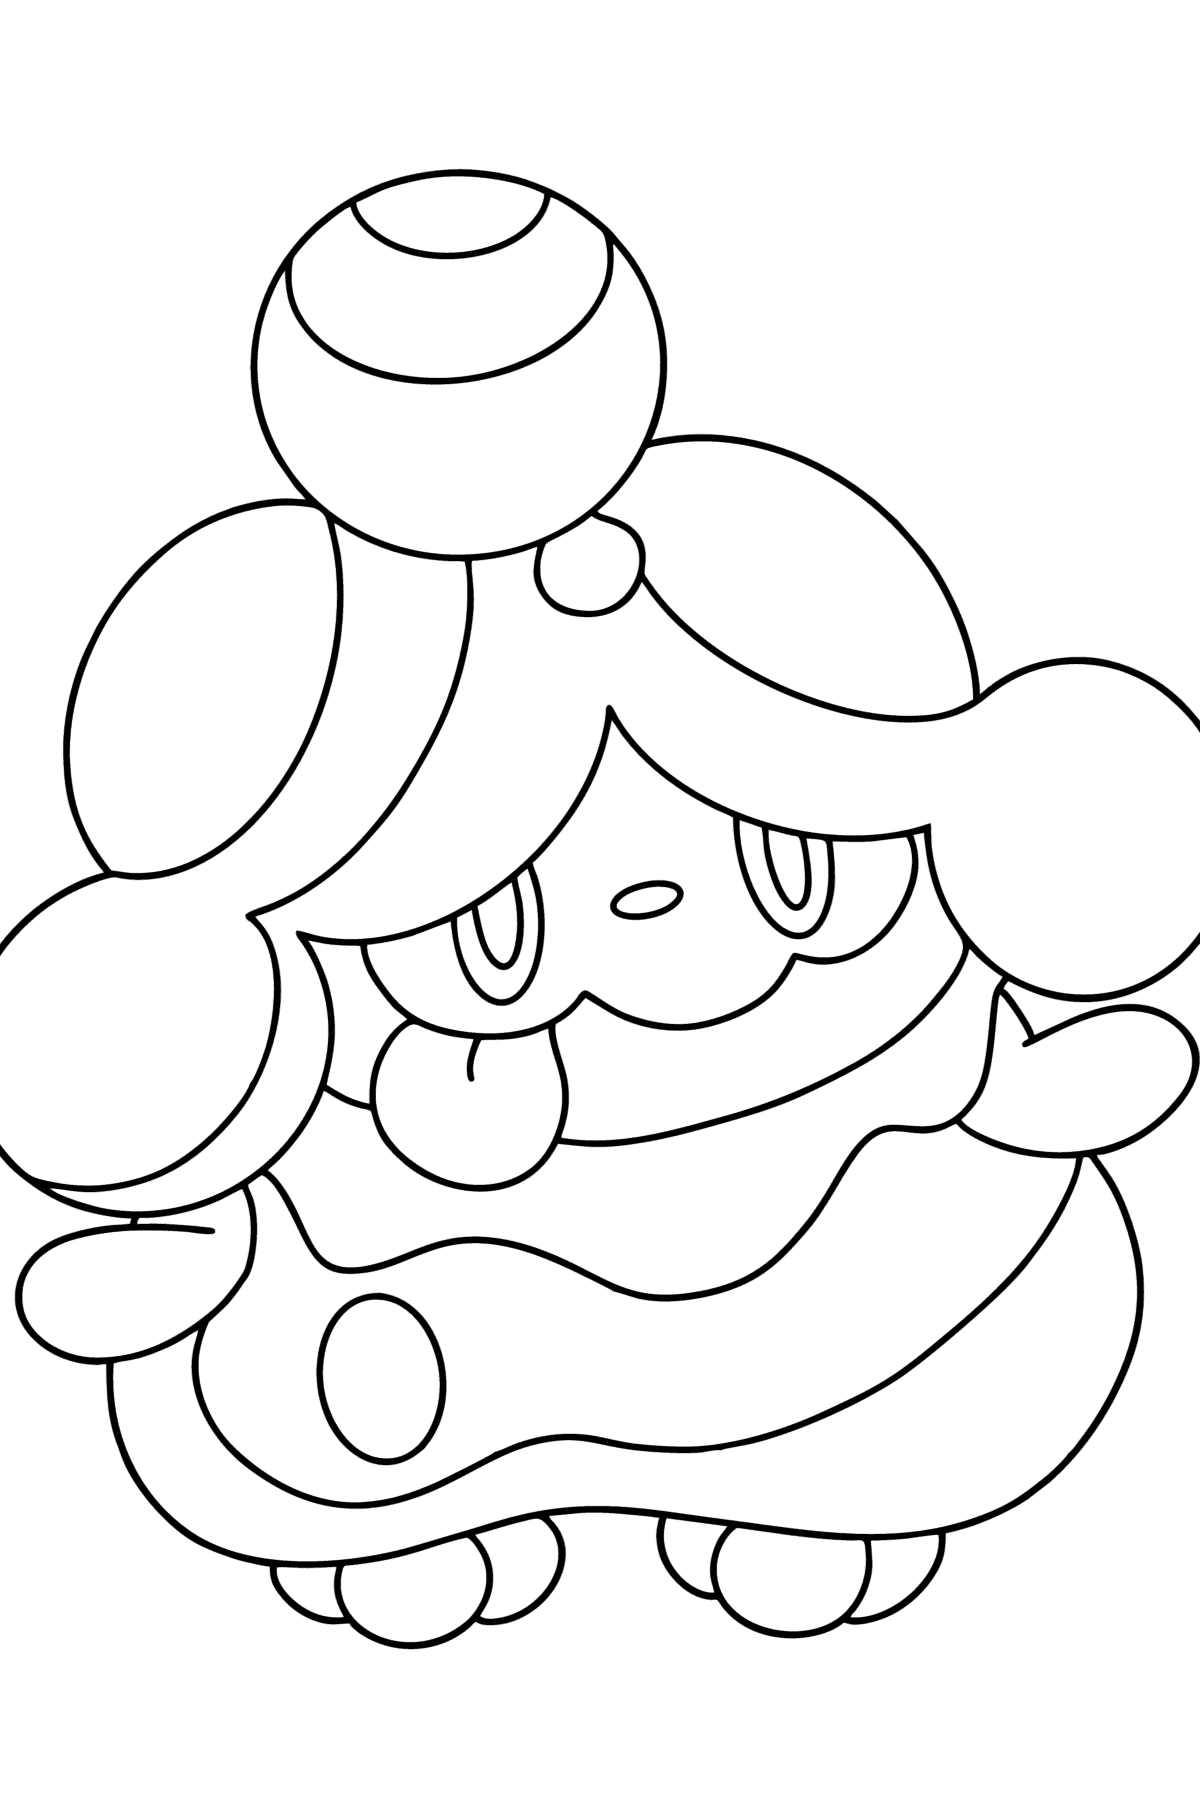 Colouring page Pokémon X and Y Slurpuff - Coloring Pages for Kids